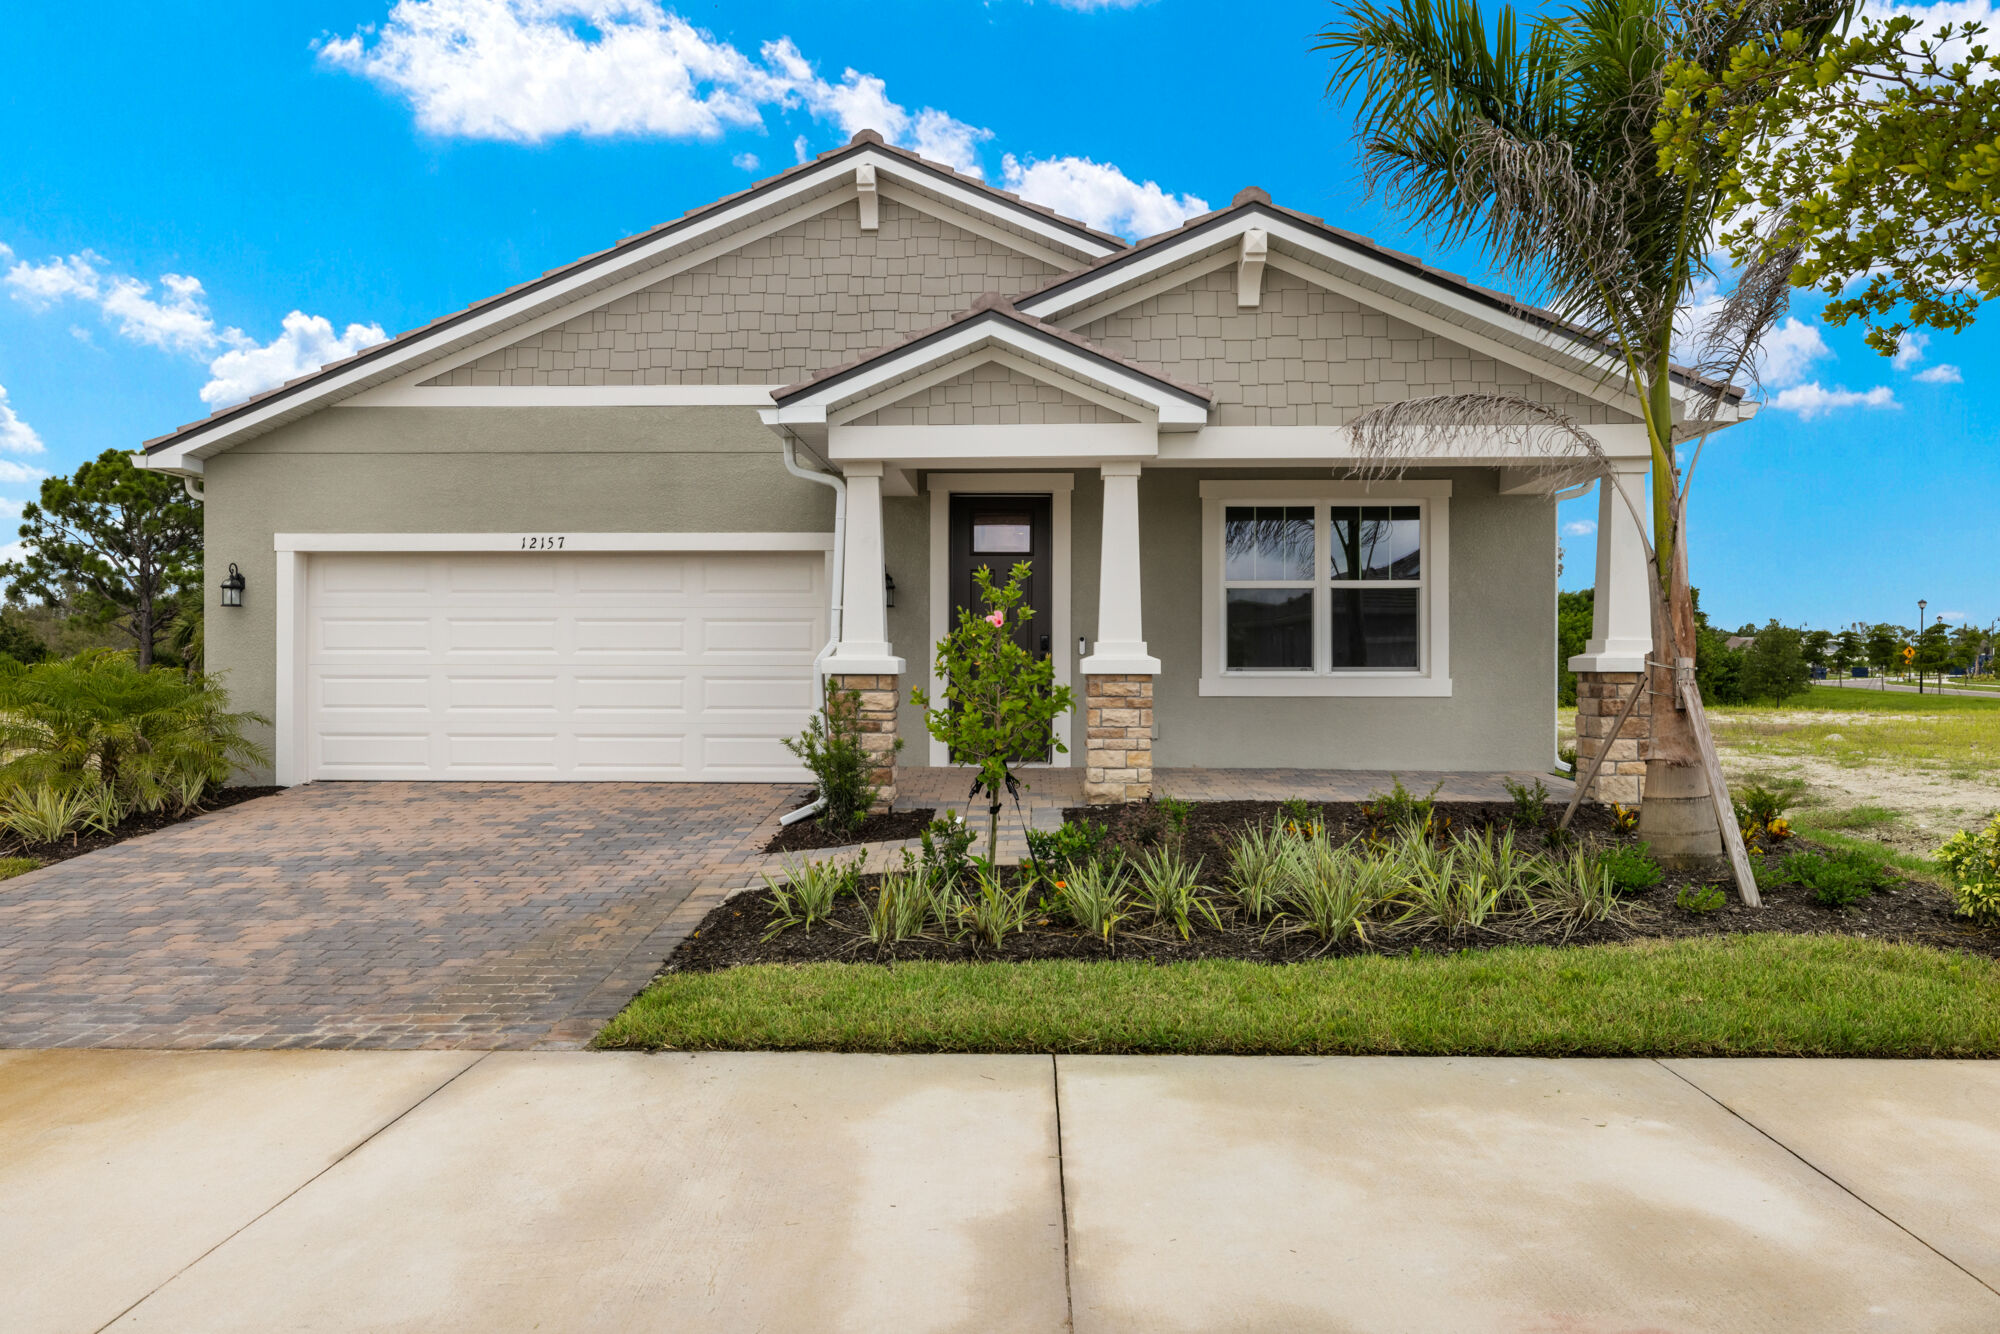 4 bedroom, 3 baths, open concept kitchen, dining and great room, executive kitchen, study, 2 car garage, covered lanai, split bedroom plan, luxury vinyl plank flooring, shaker style cabinets, Calacatta Ultra quartz countertops throughout the home, glass tile backsplash, pantry, 